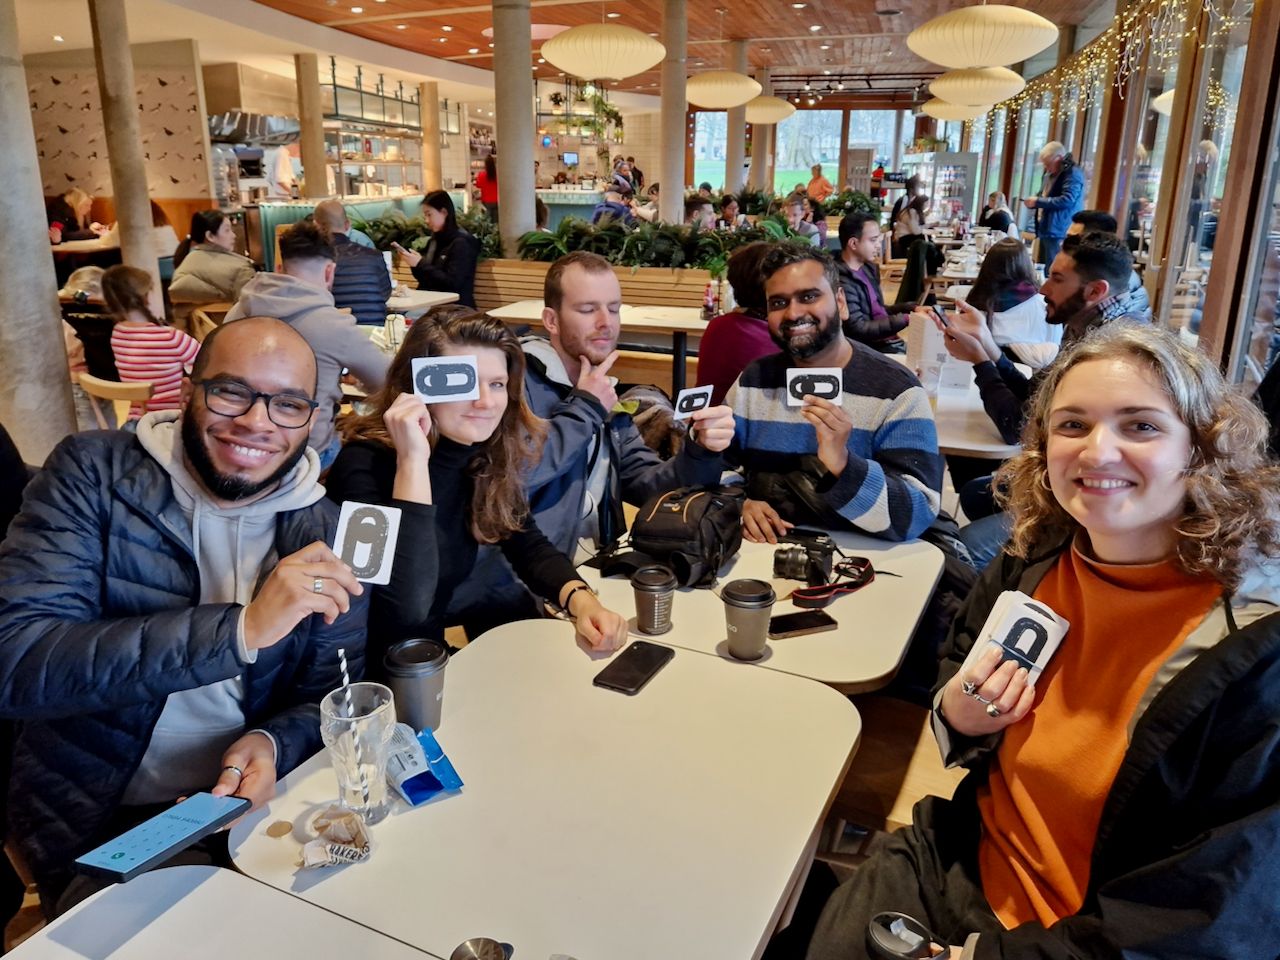 group of people holding Just Looking prompt cards in a cafe